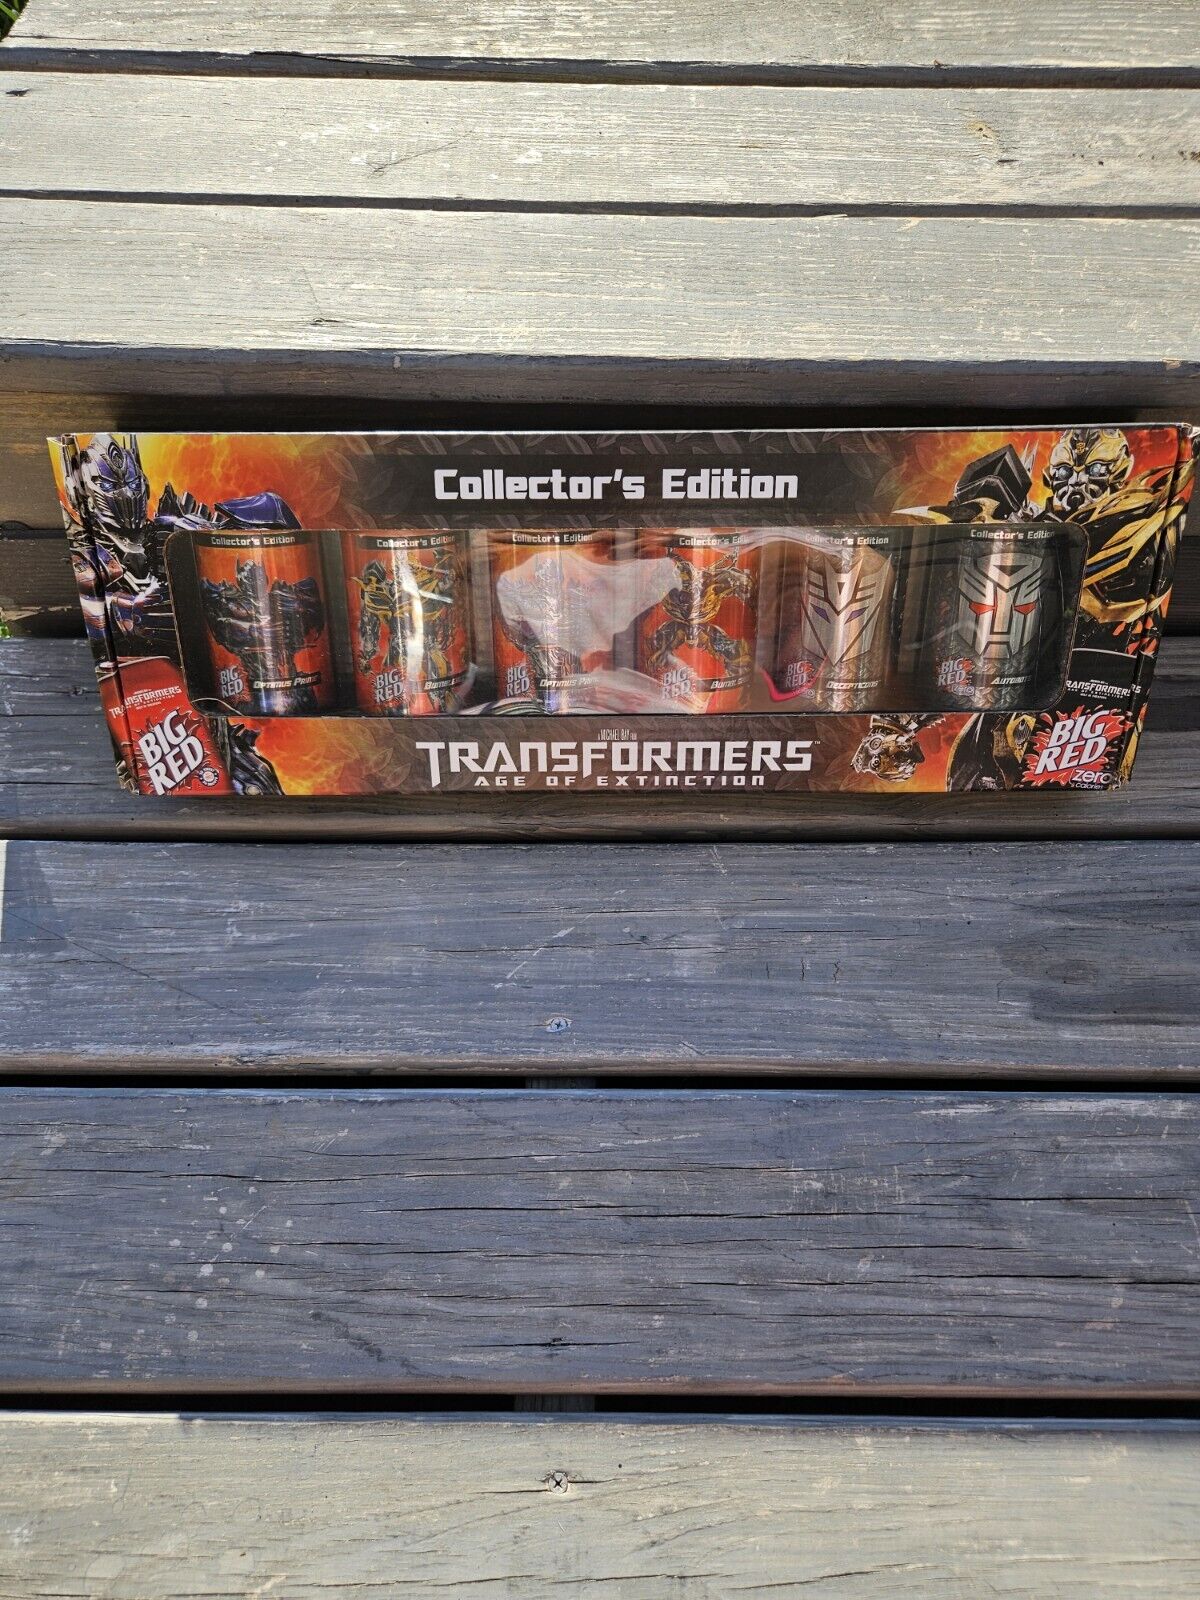 BIG RED Soda Transformers Age of Extinction COLLECTOR\'S EDITION Unopened Box